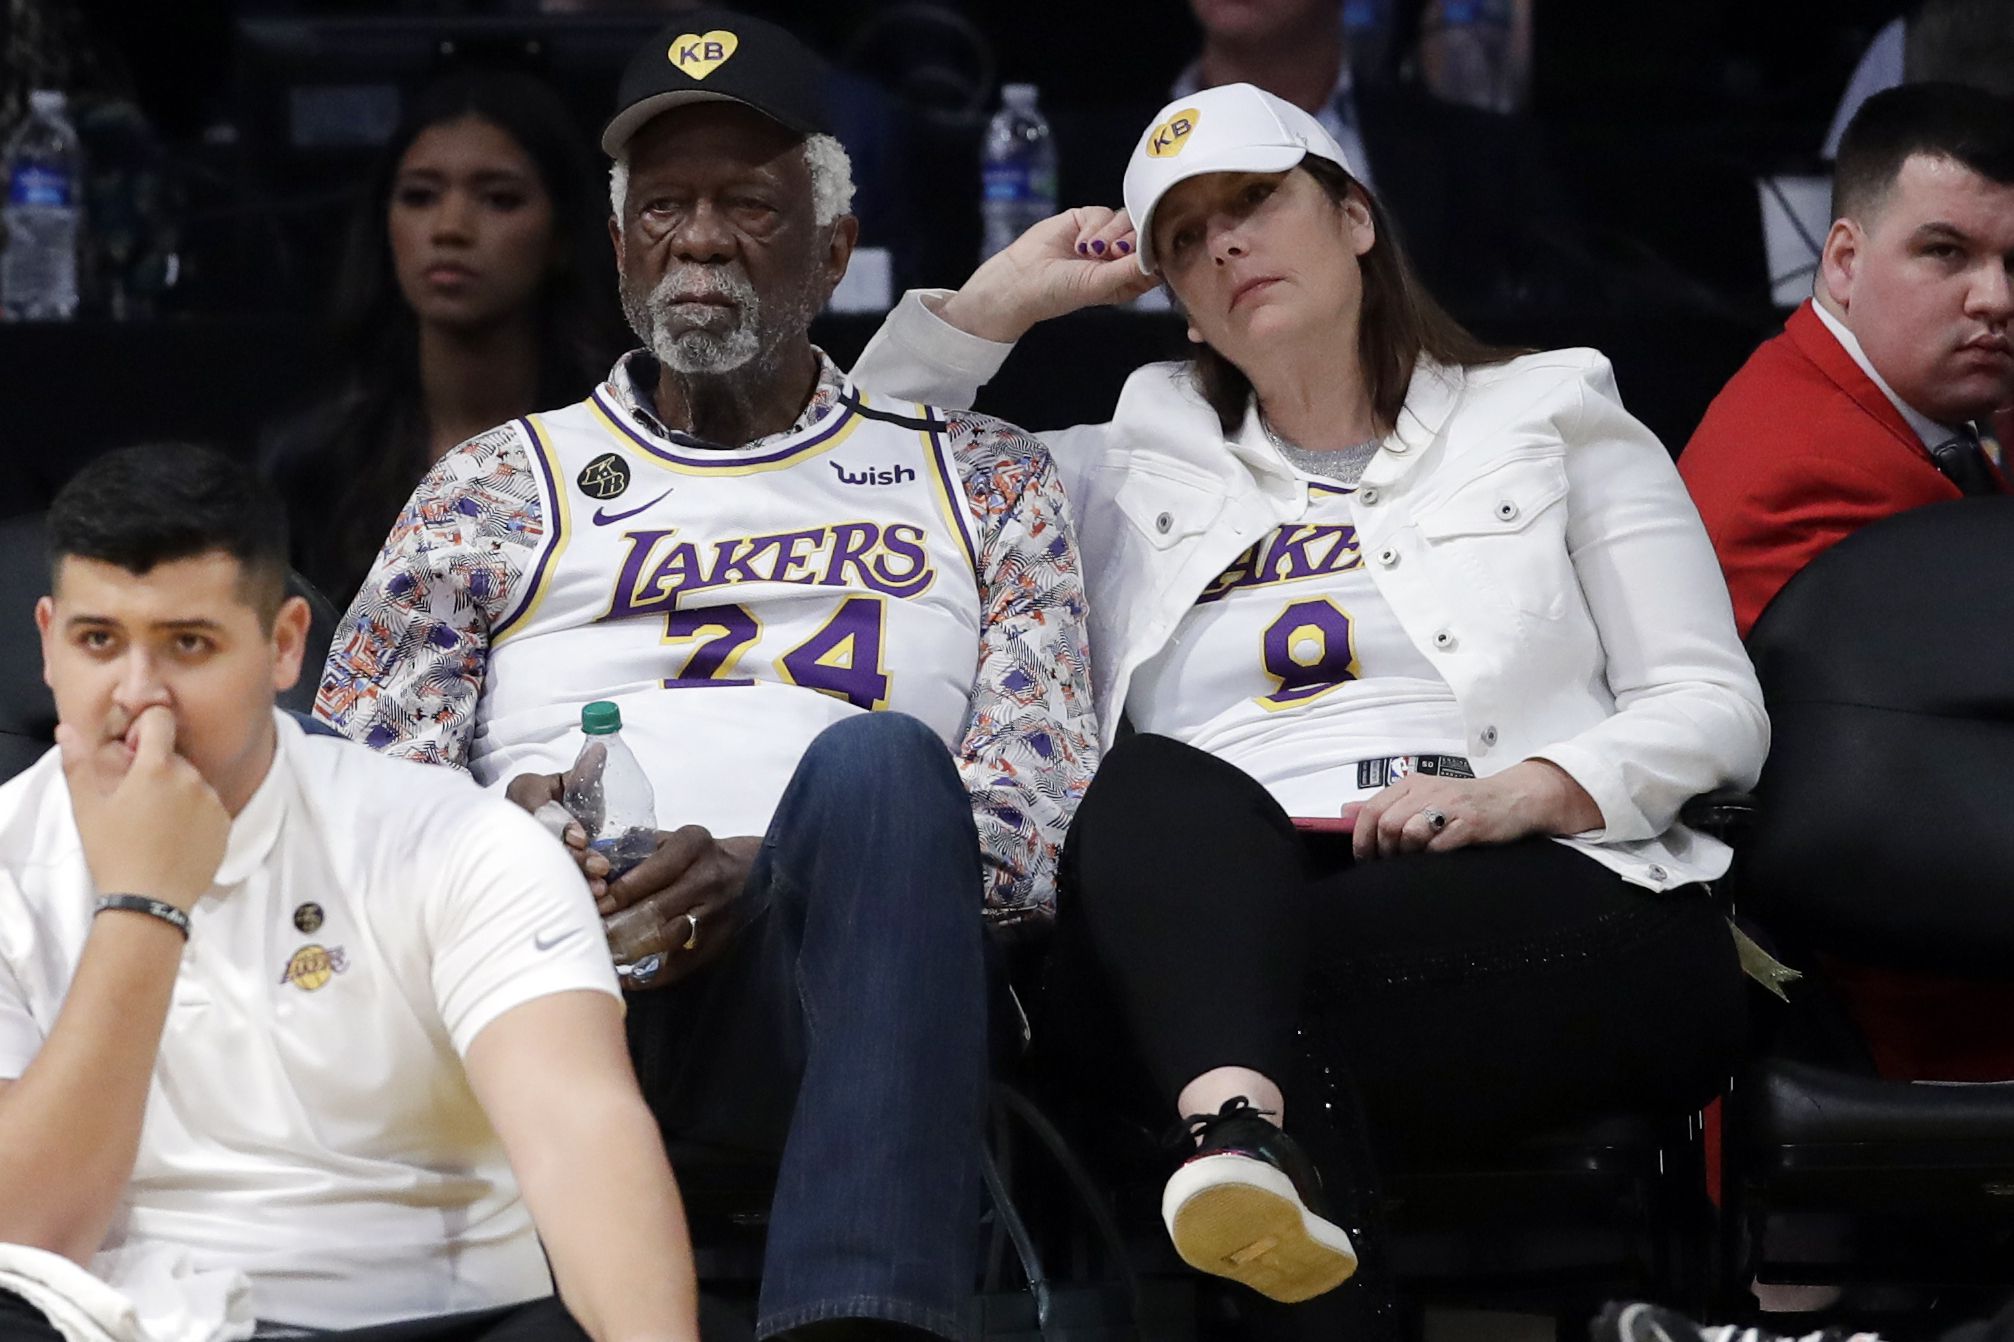 Bill Russell Rocking A Kobe Bryant Jersey At The Lakers vs Celtics